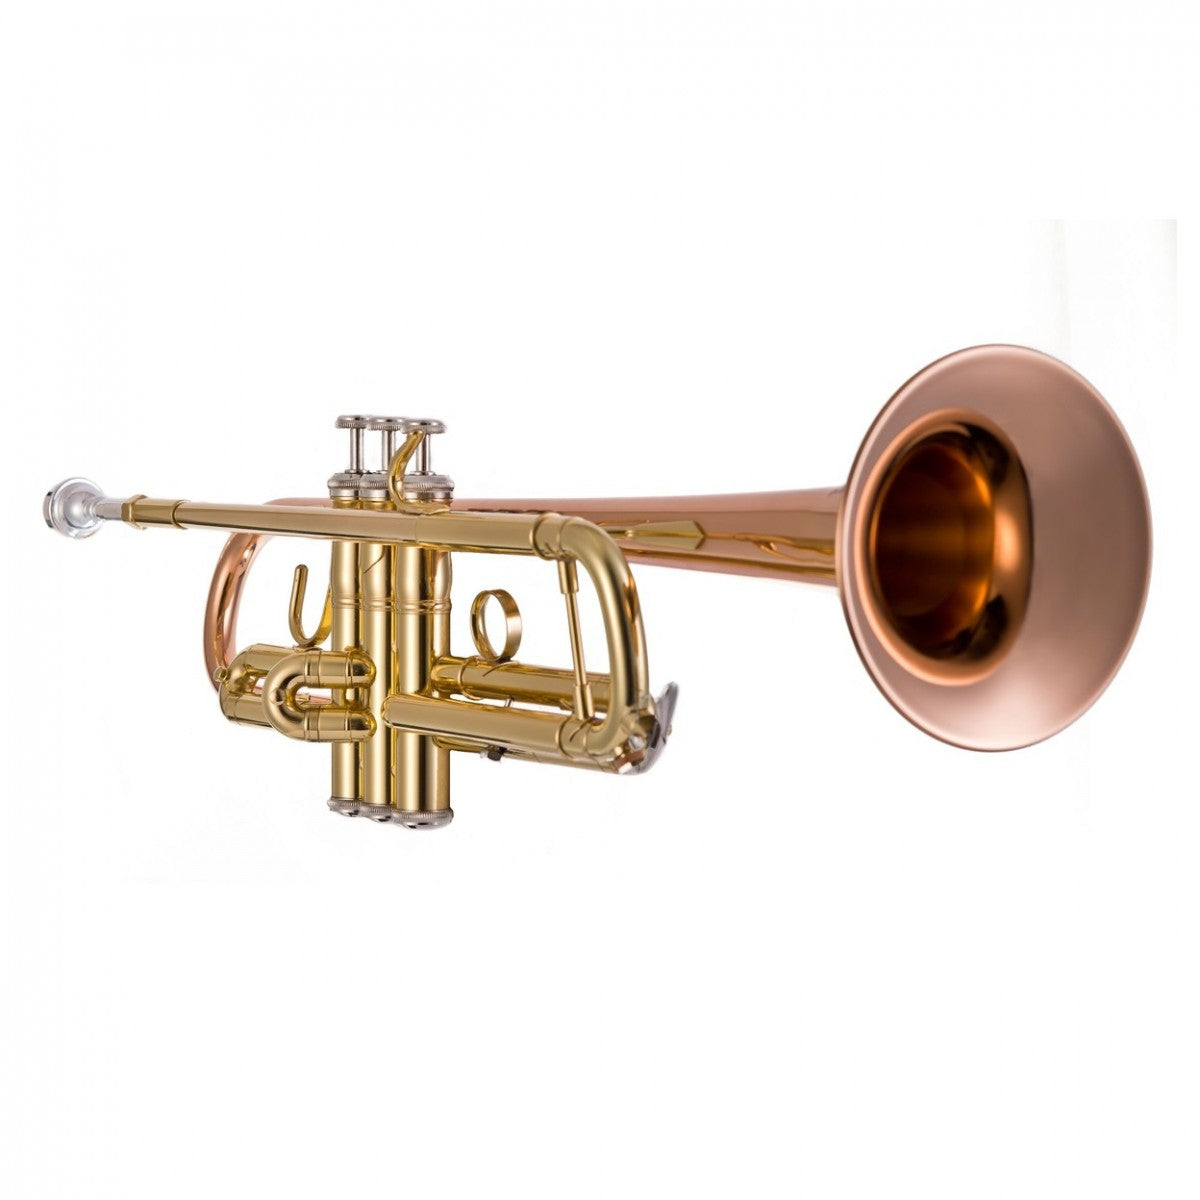 Bach TR355G Bb trumpet outfit